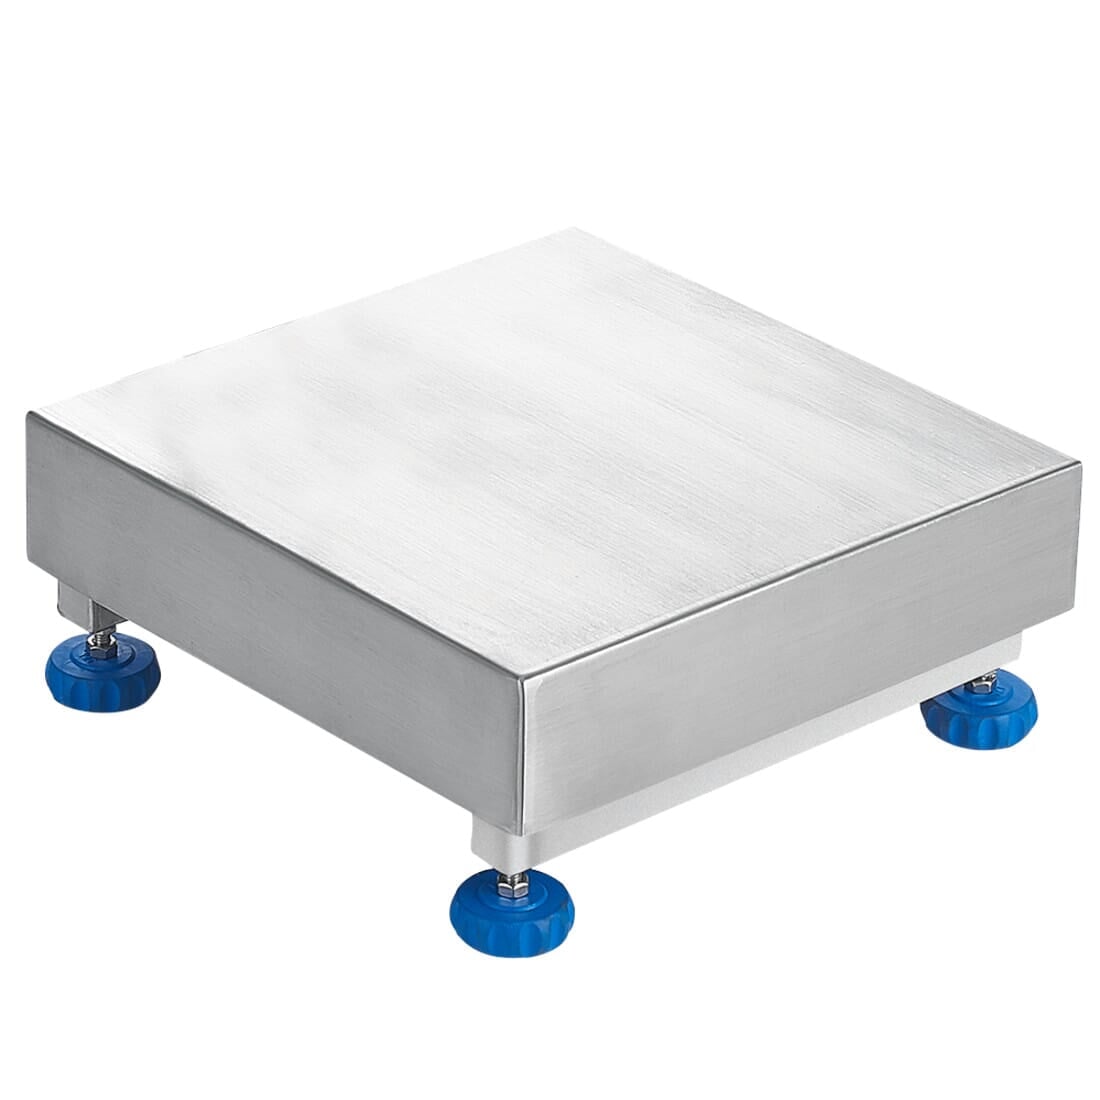 Adam Equipment WS 30AM W Series Approved Stainless Steel Platforms NTEP, 15000 g X 2 g